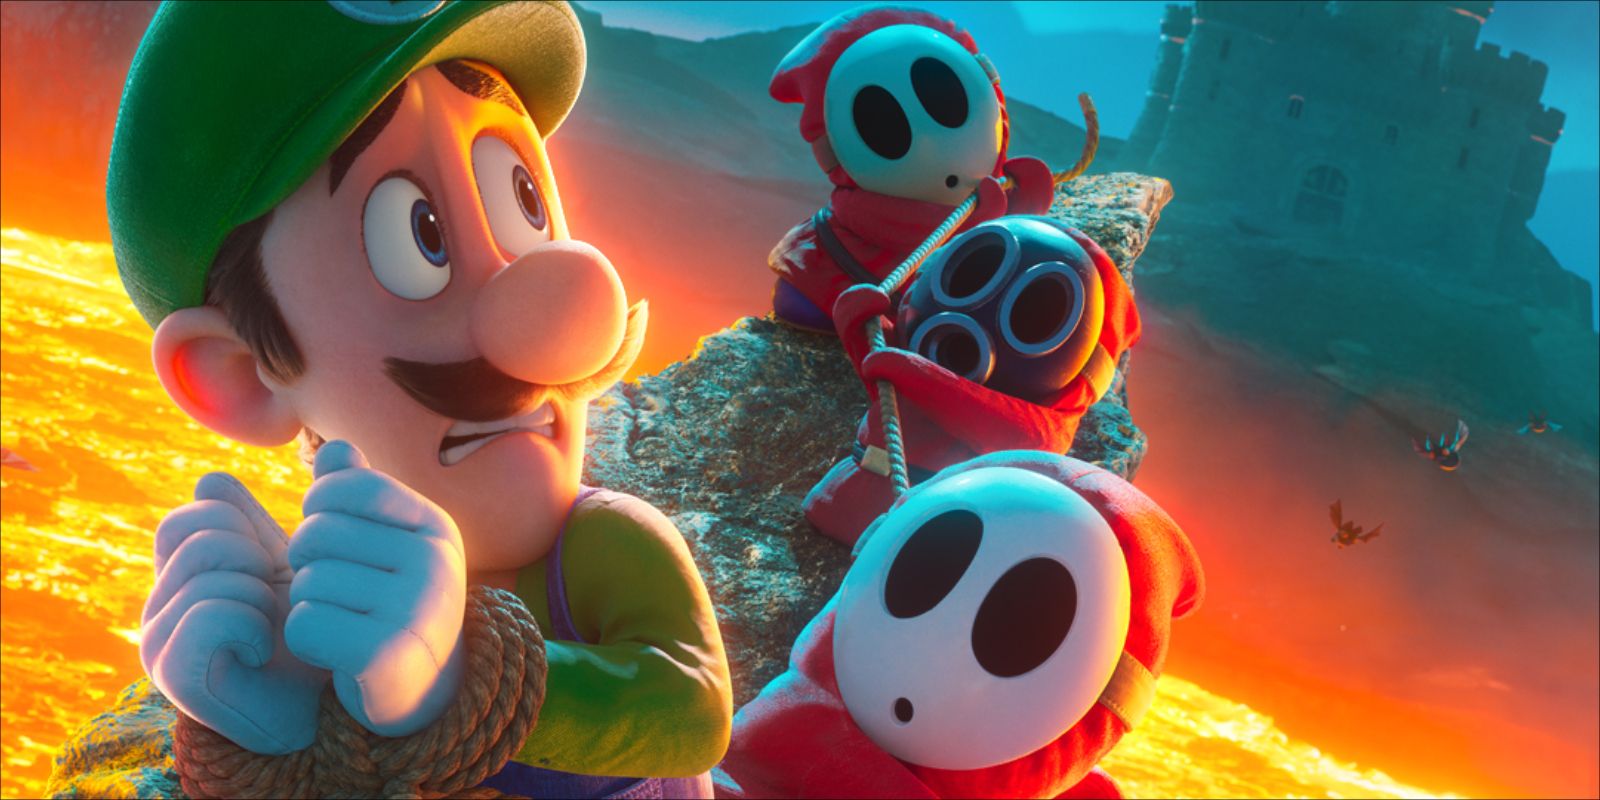 New The Super Mario Bros. Movie posters shows Bowser and Donkey Kong